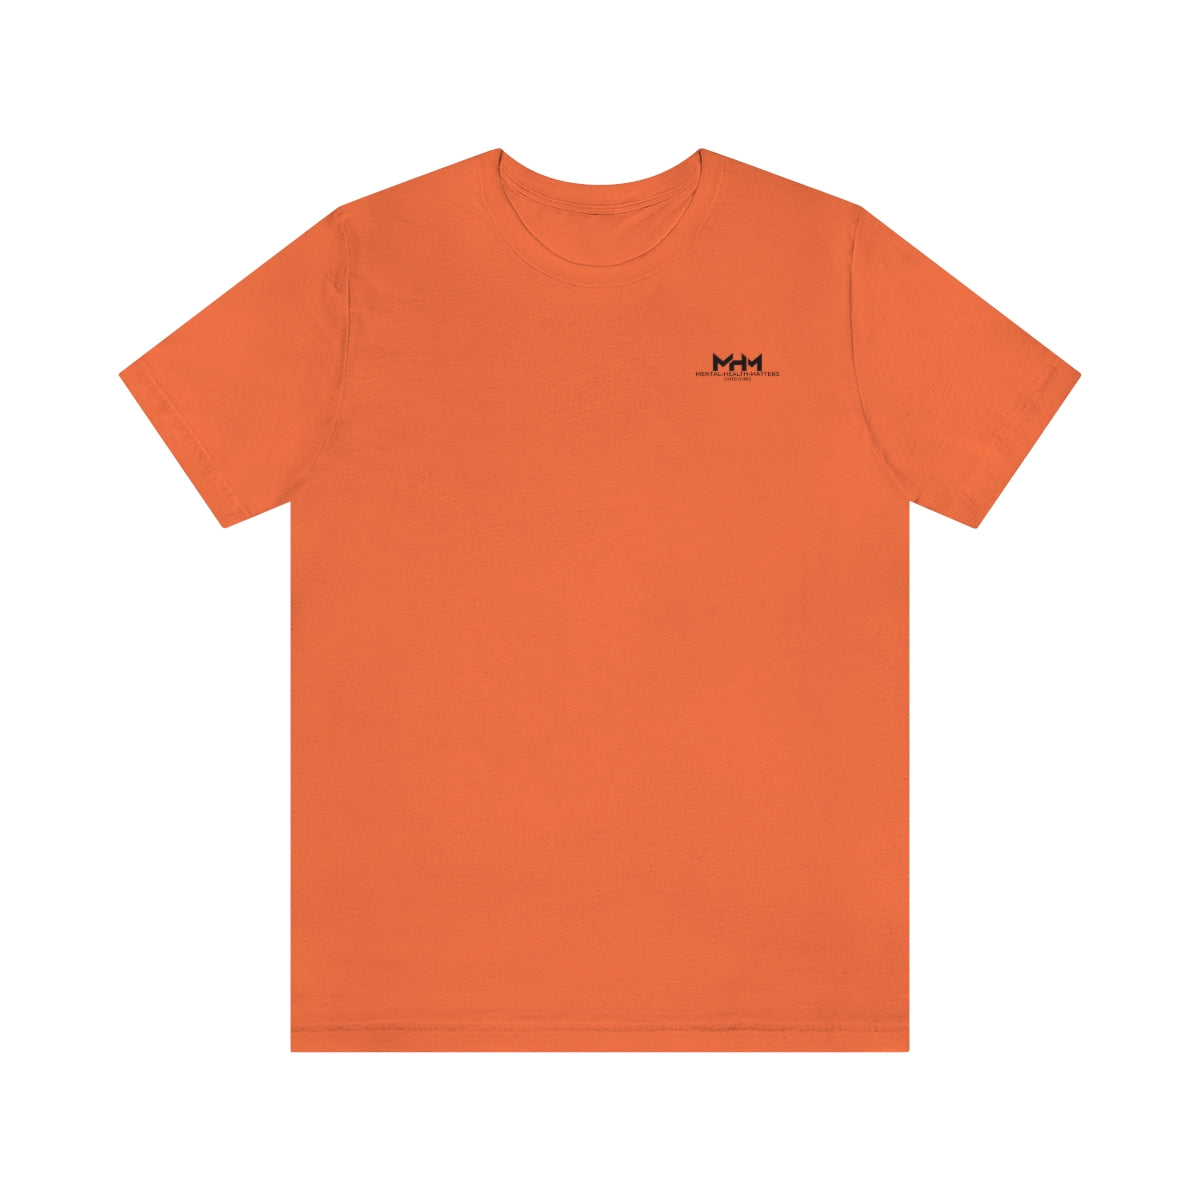 MHM Graffiti Tee (3 Colors Available)